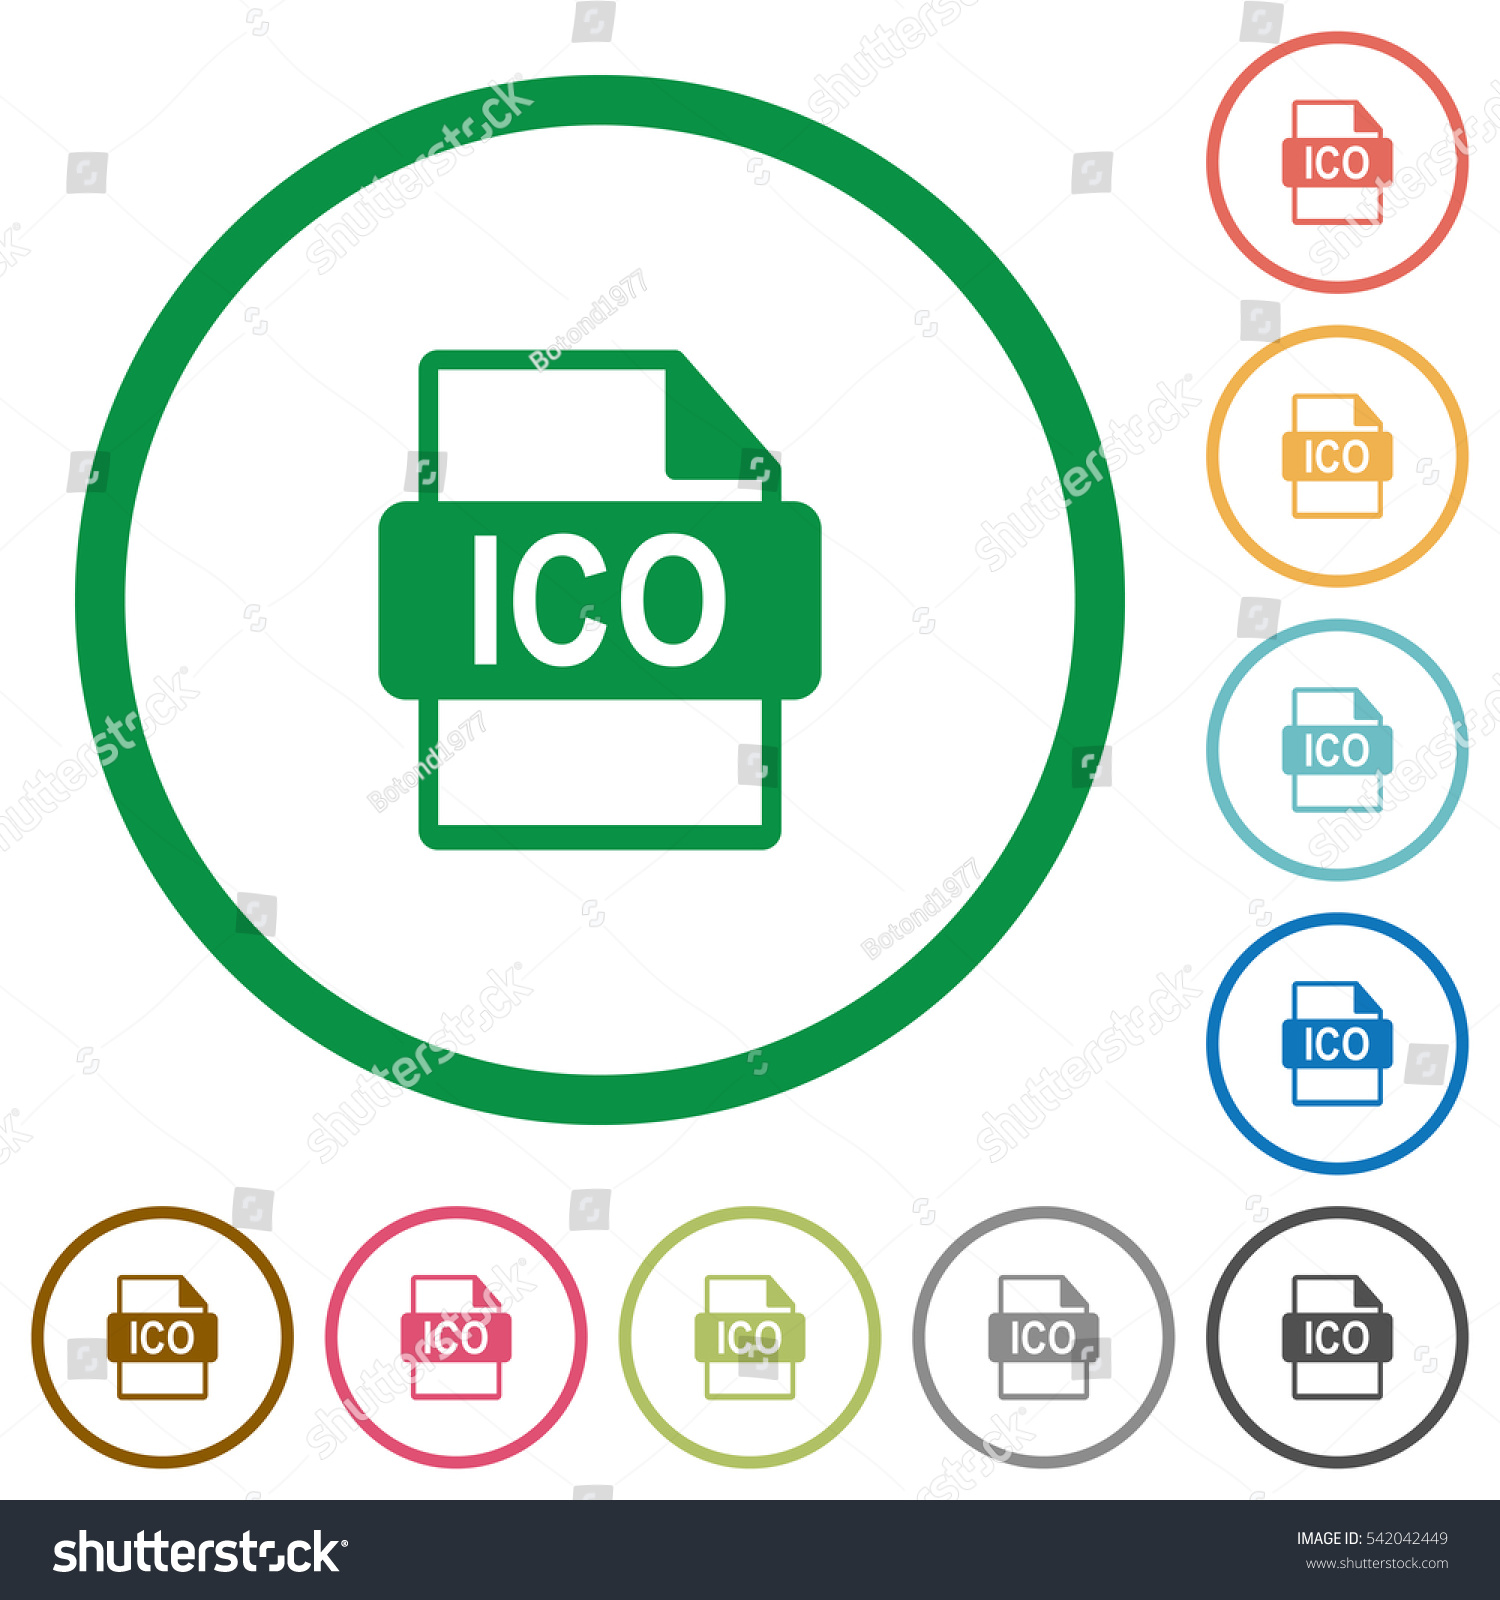 Ico File Format Flat Color Icons Stock Vector Royalty Free 542042449